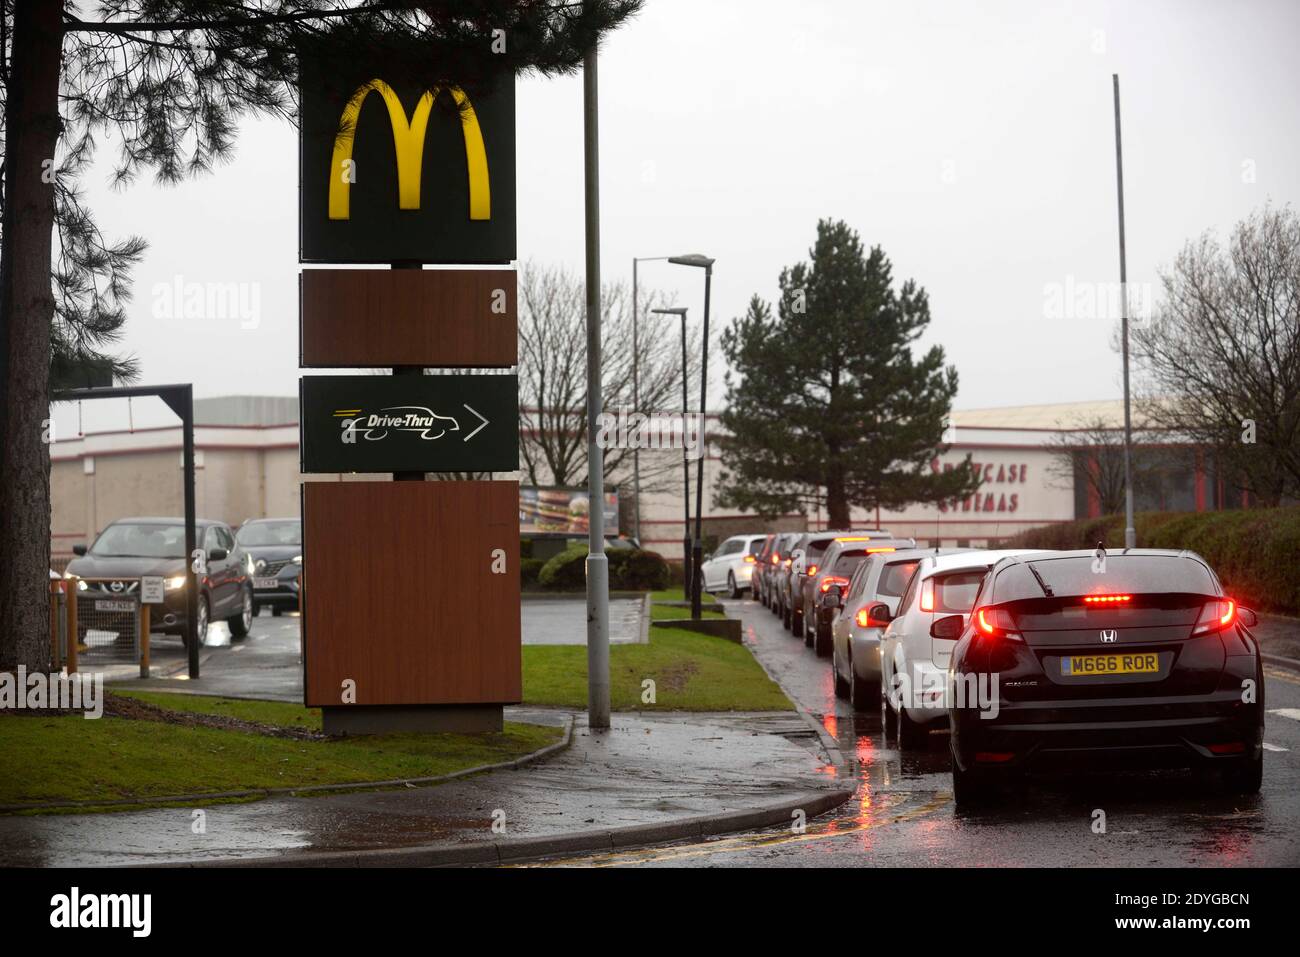 Linnwood, Renfrewshire, Scotland. 26th December   A combination of tougher lockdown restrictions and bad weather has left the street of Scotland mostly deserted.   Cars queuing for McDonalds drive through. Credit: Chris McNulty/Alamy Live News Stock Photo